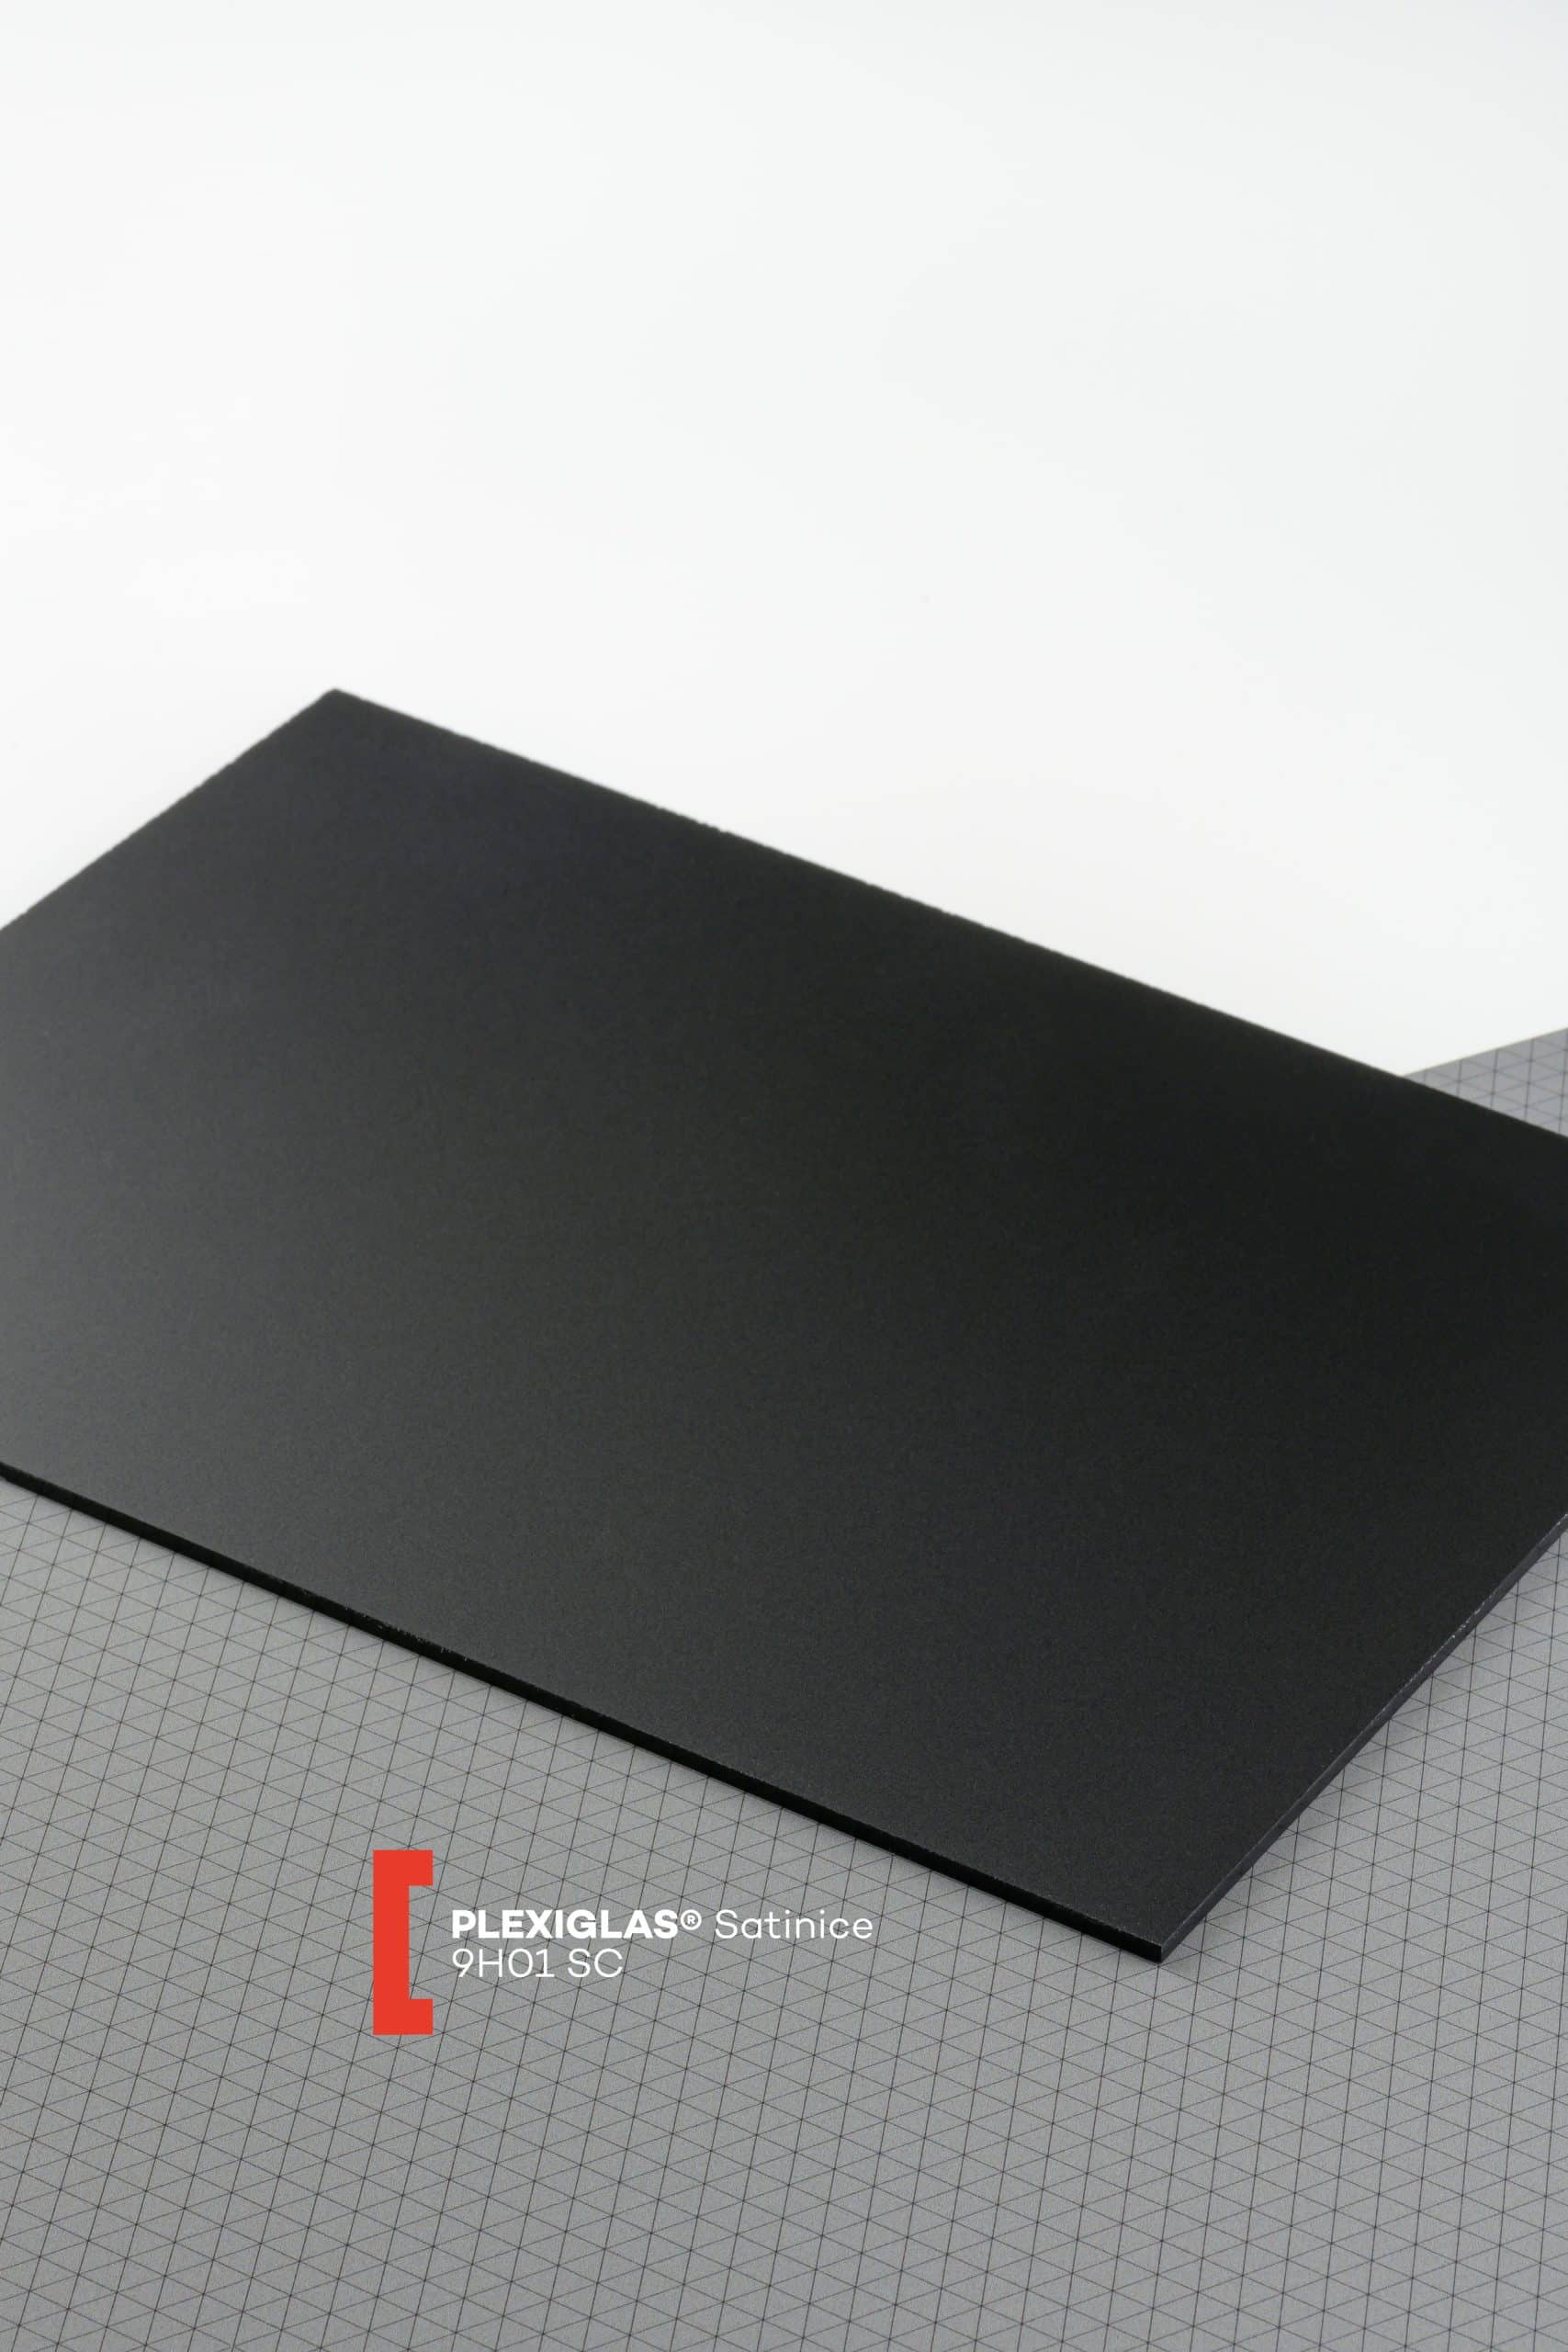 Top-rated And Dependable Acrylic Sheet 1 Inch Thick Plastic Sheet